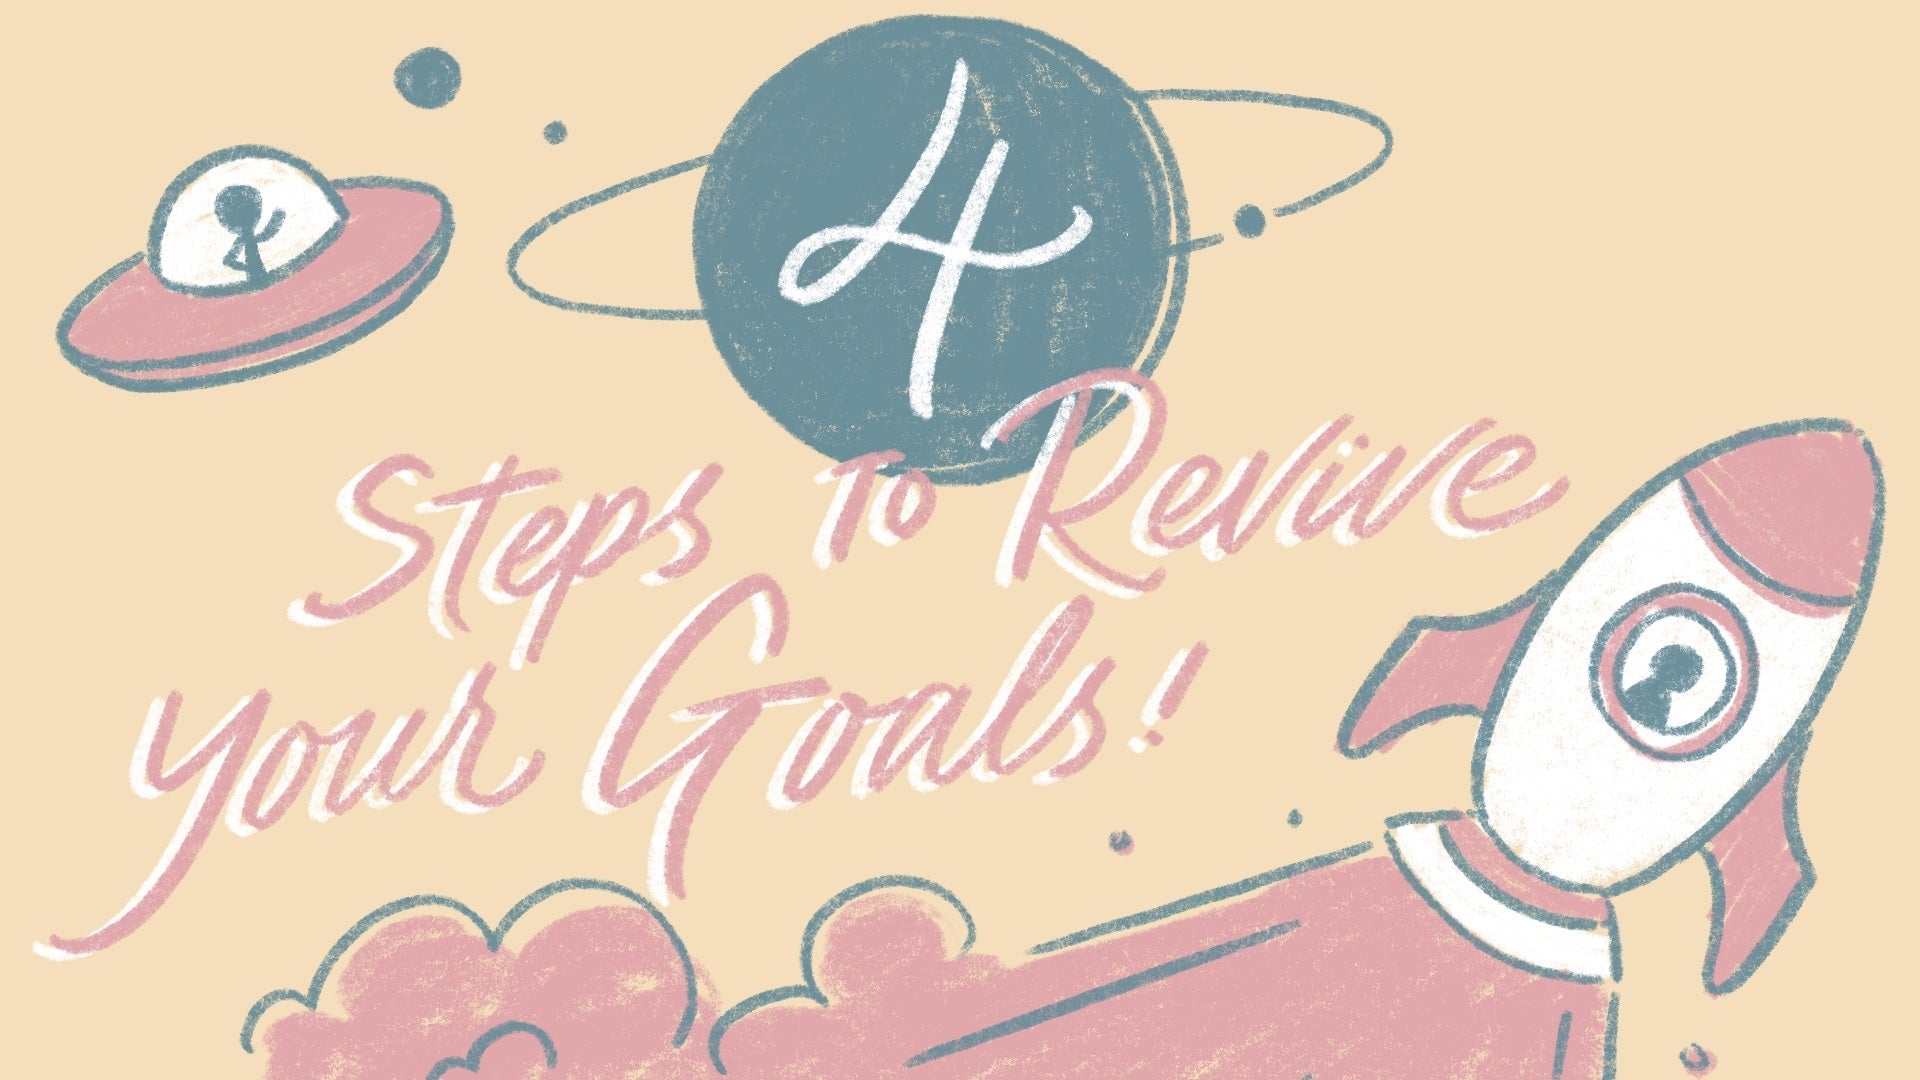 4 Steps to Revive your Goals